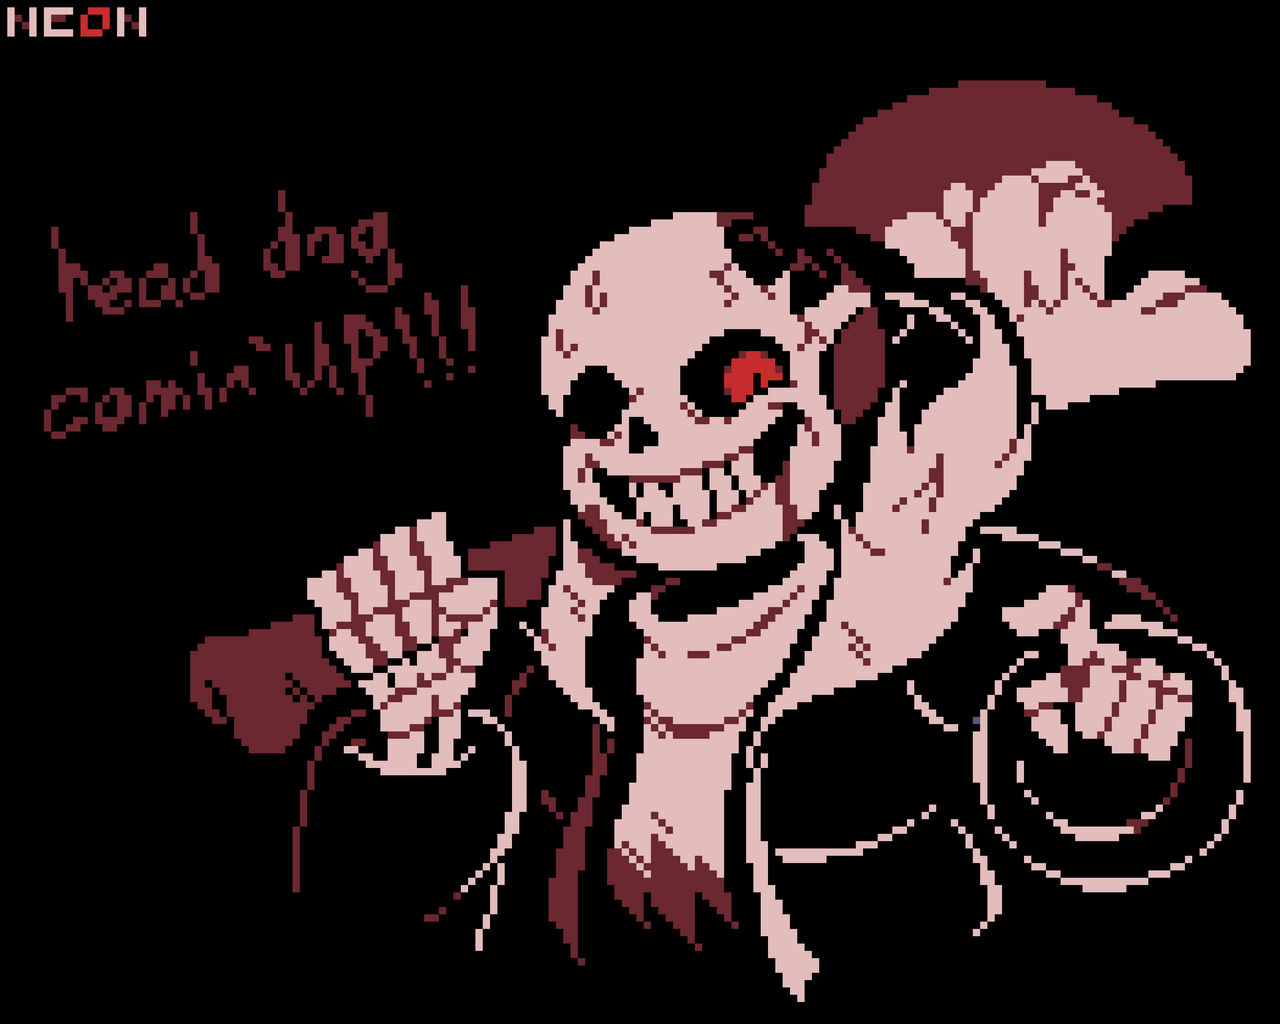 AbsurdMage Art on X: I have a real love for a soft Horror Sans. #undertale  #undertaleau #horrortale #horrortalesans #horrorsans #art #myart  #digitalart #fanart  / X